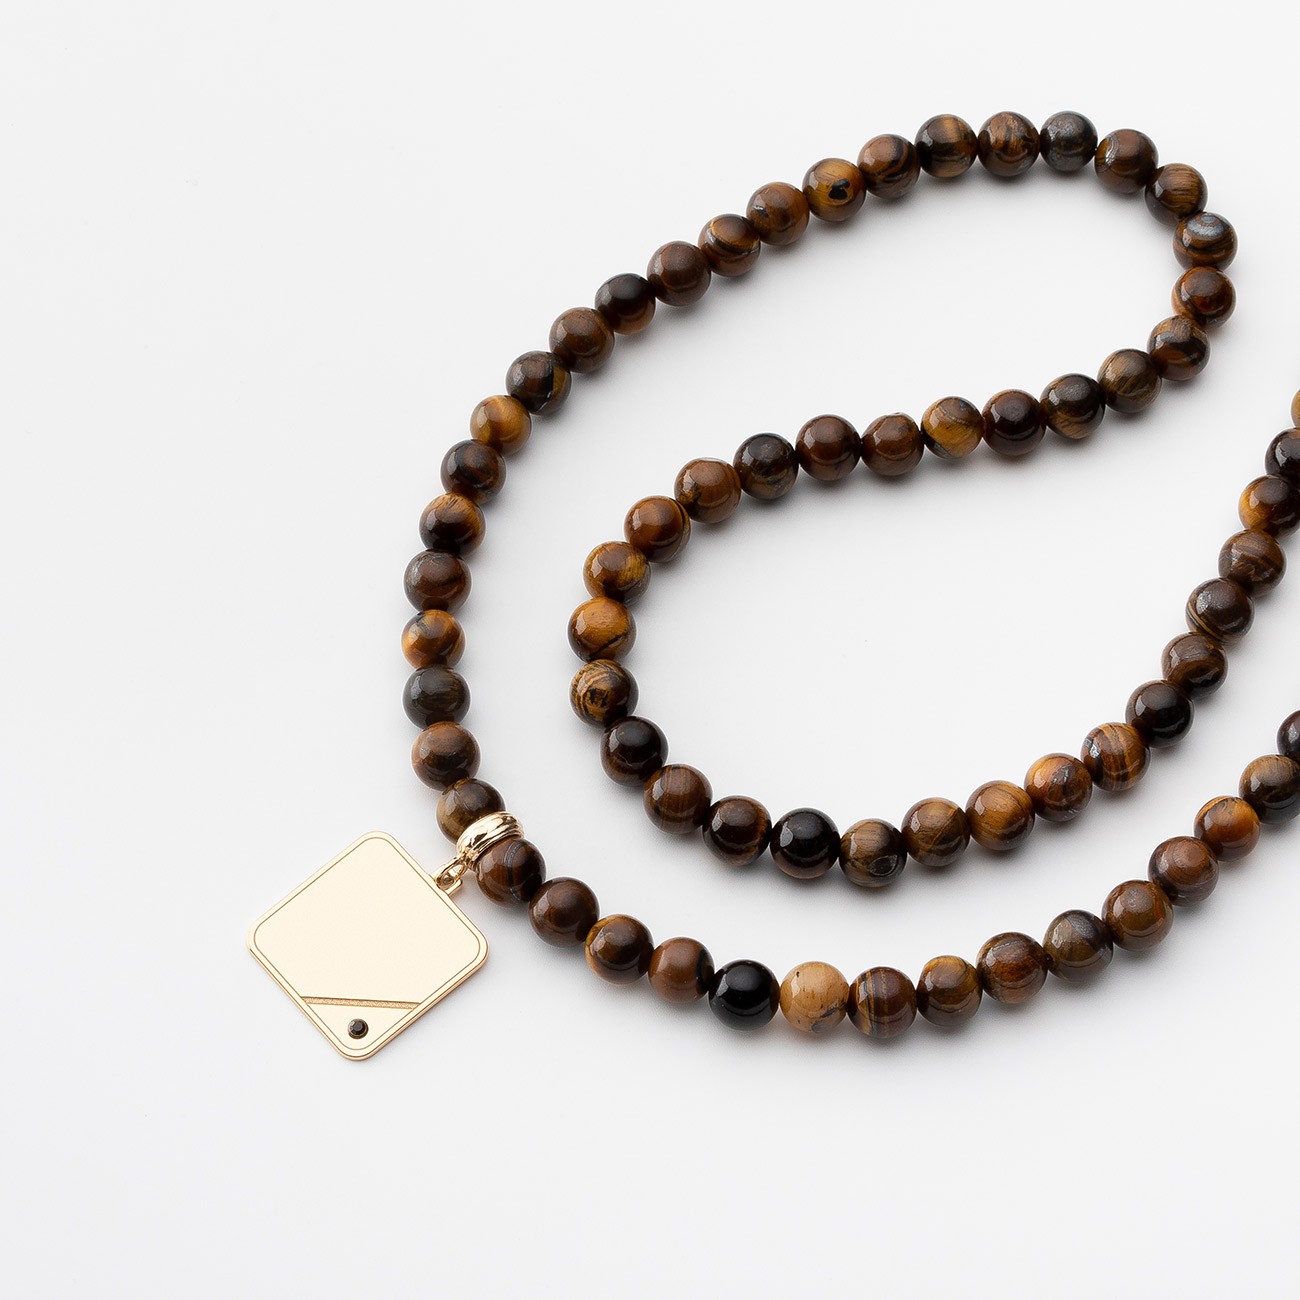 Square pendant with black crystal, tiger's eye stone necklace